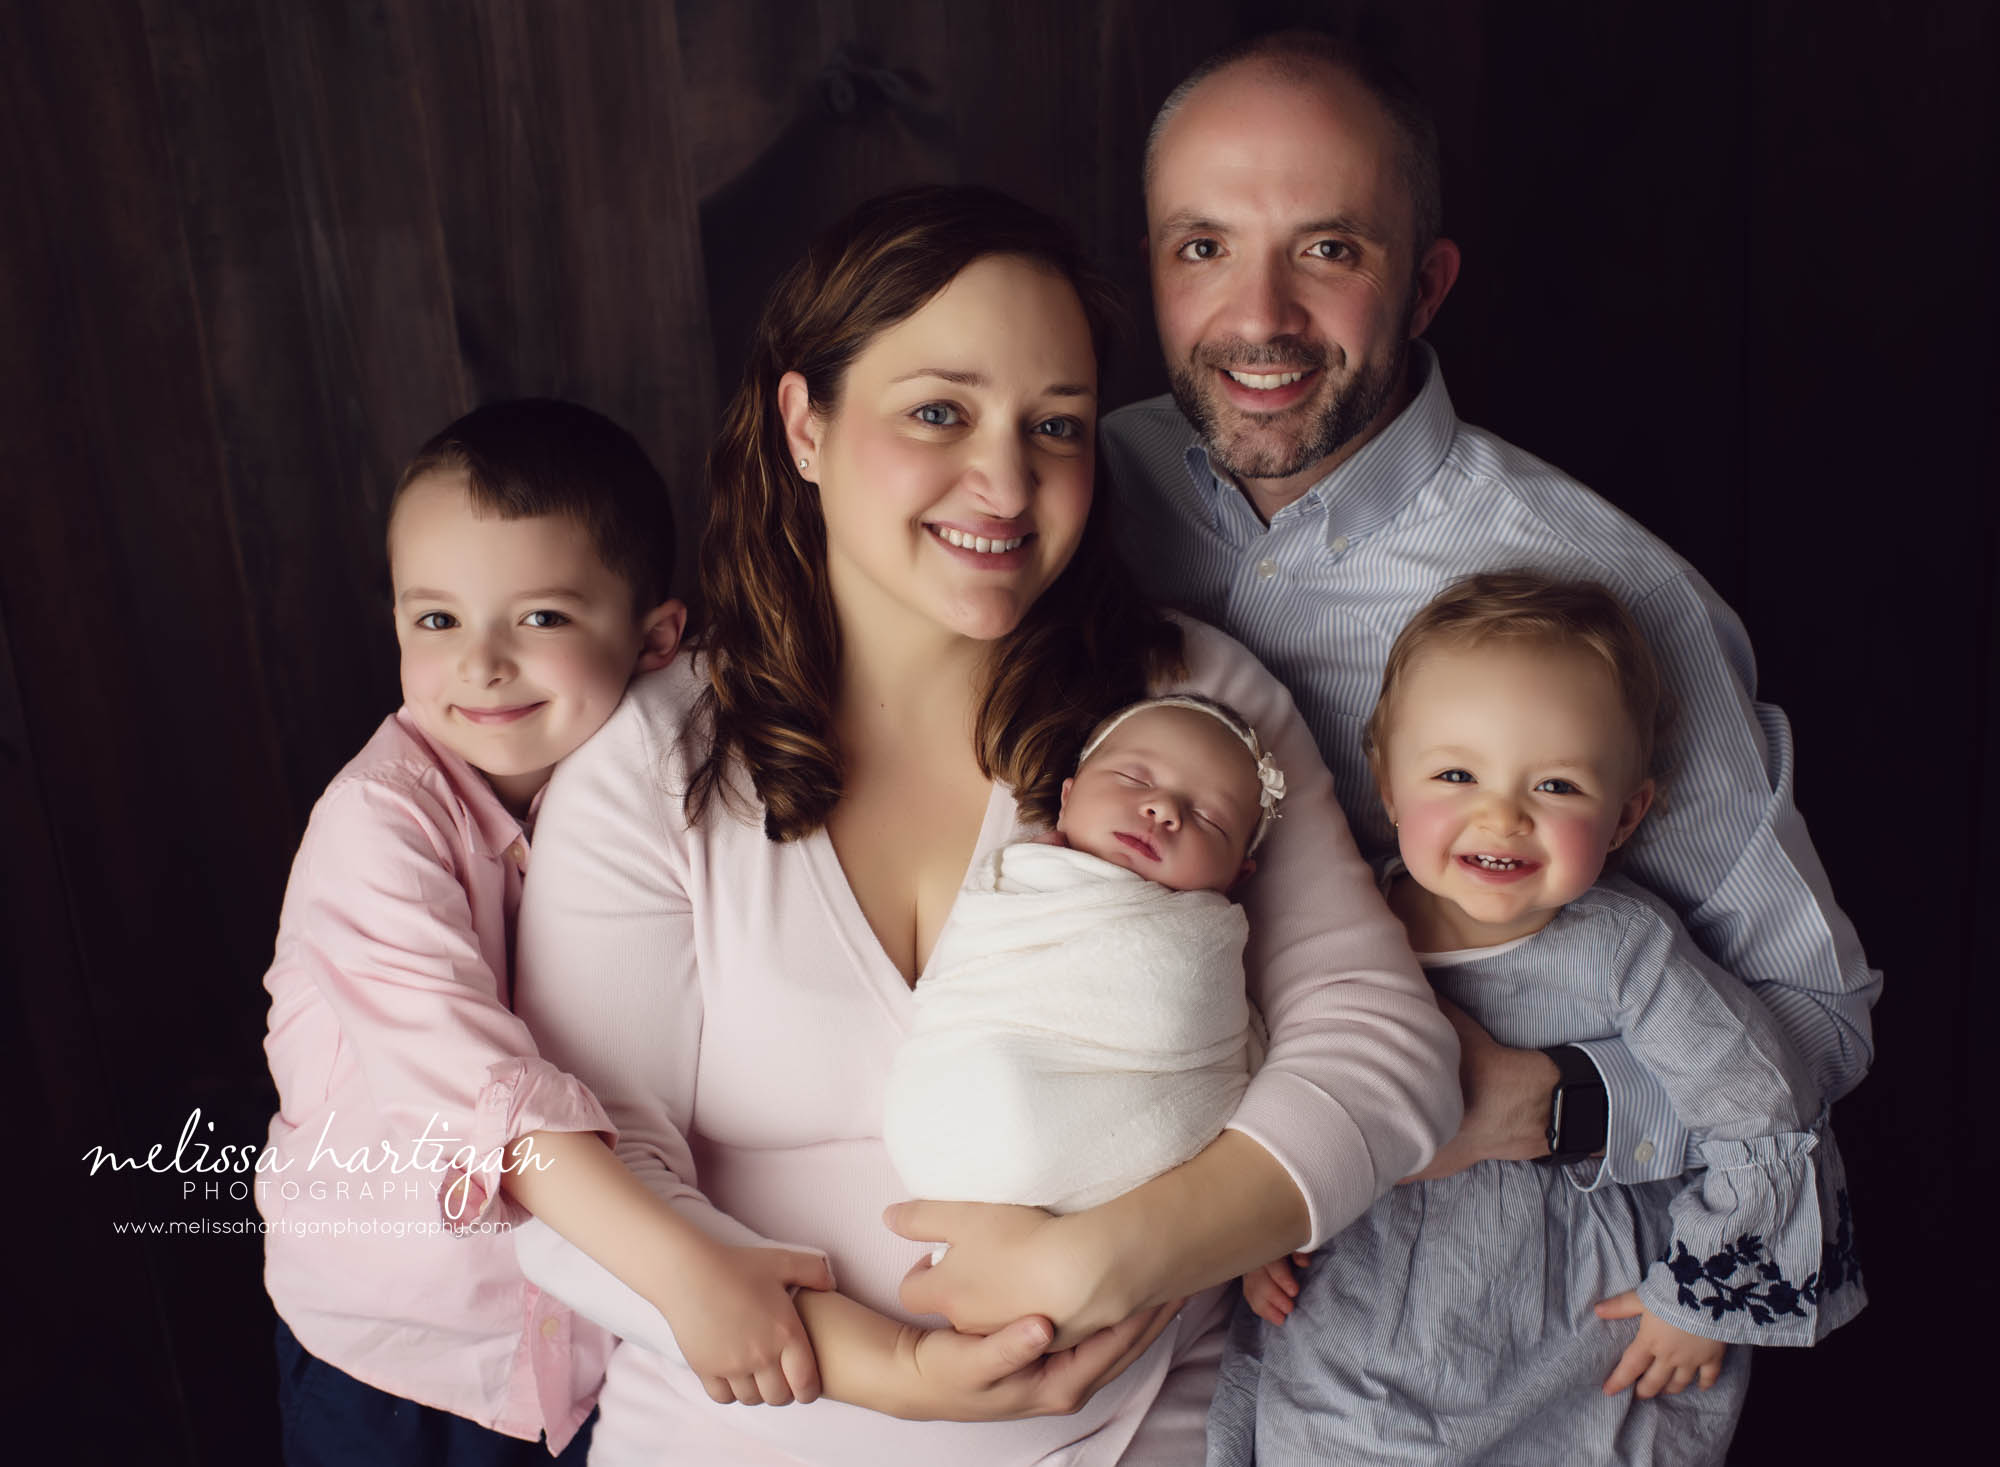 family of five newborn photography studio pose dad mom brother sister baby